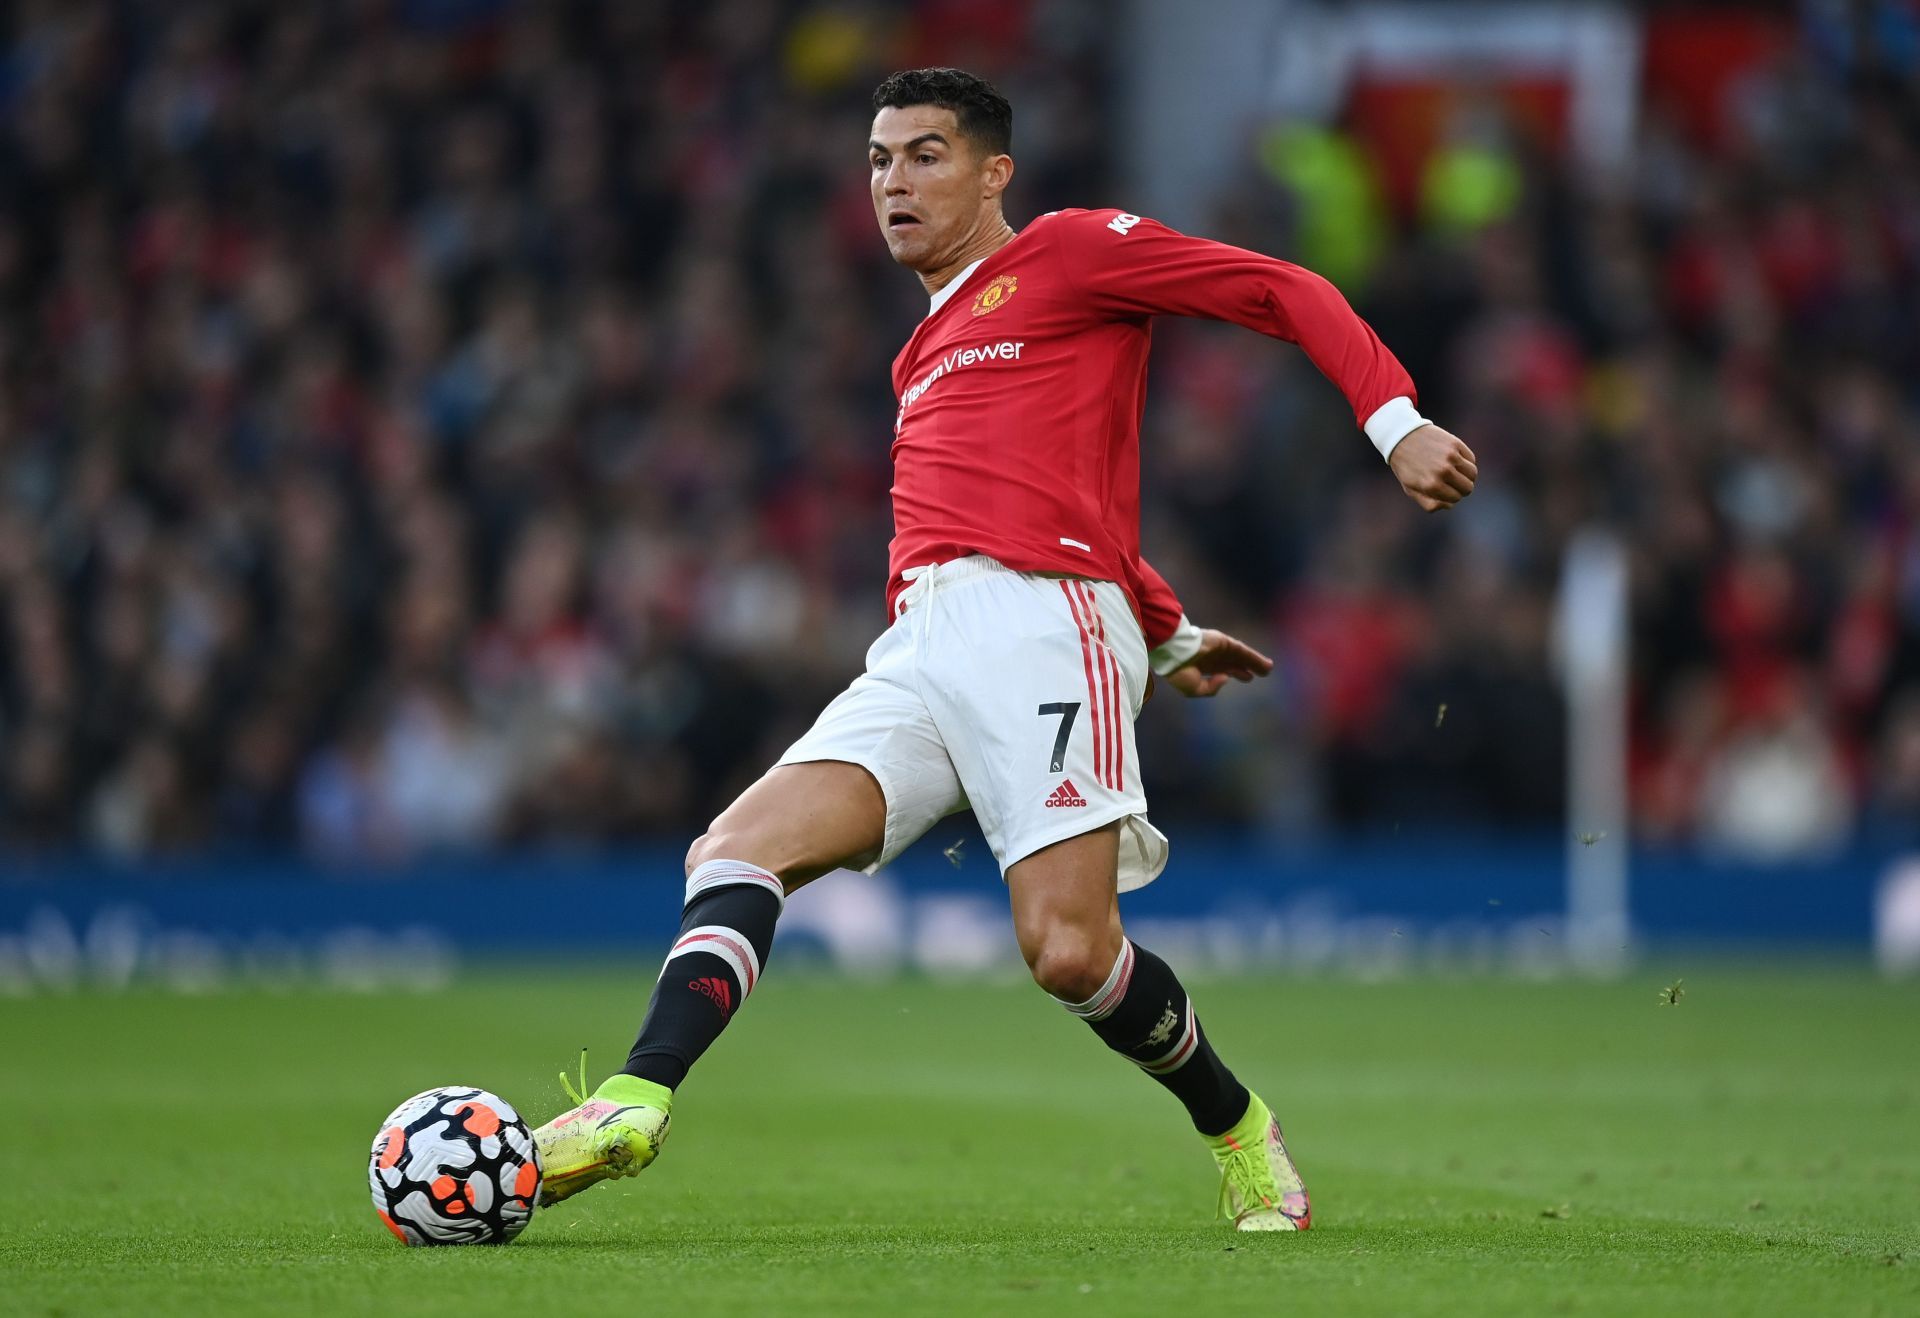 Cristiano Ronaldo has hit the ground running on his return to Old Trafford.